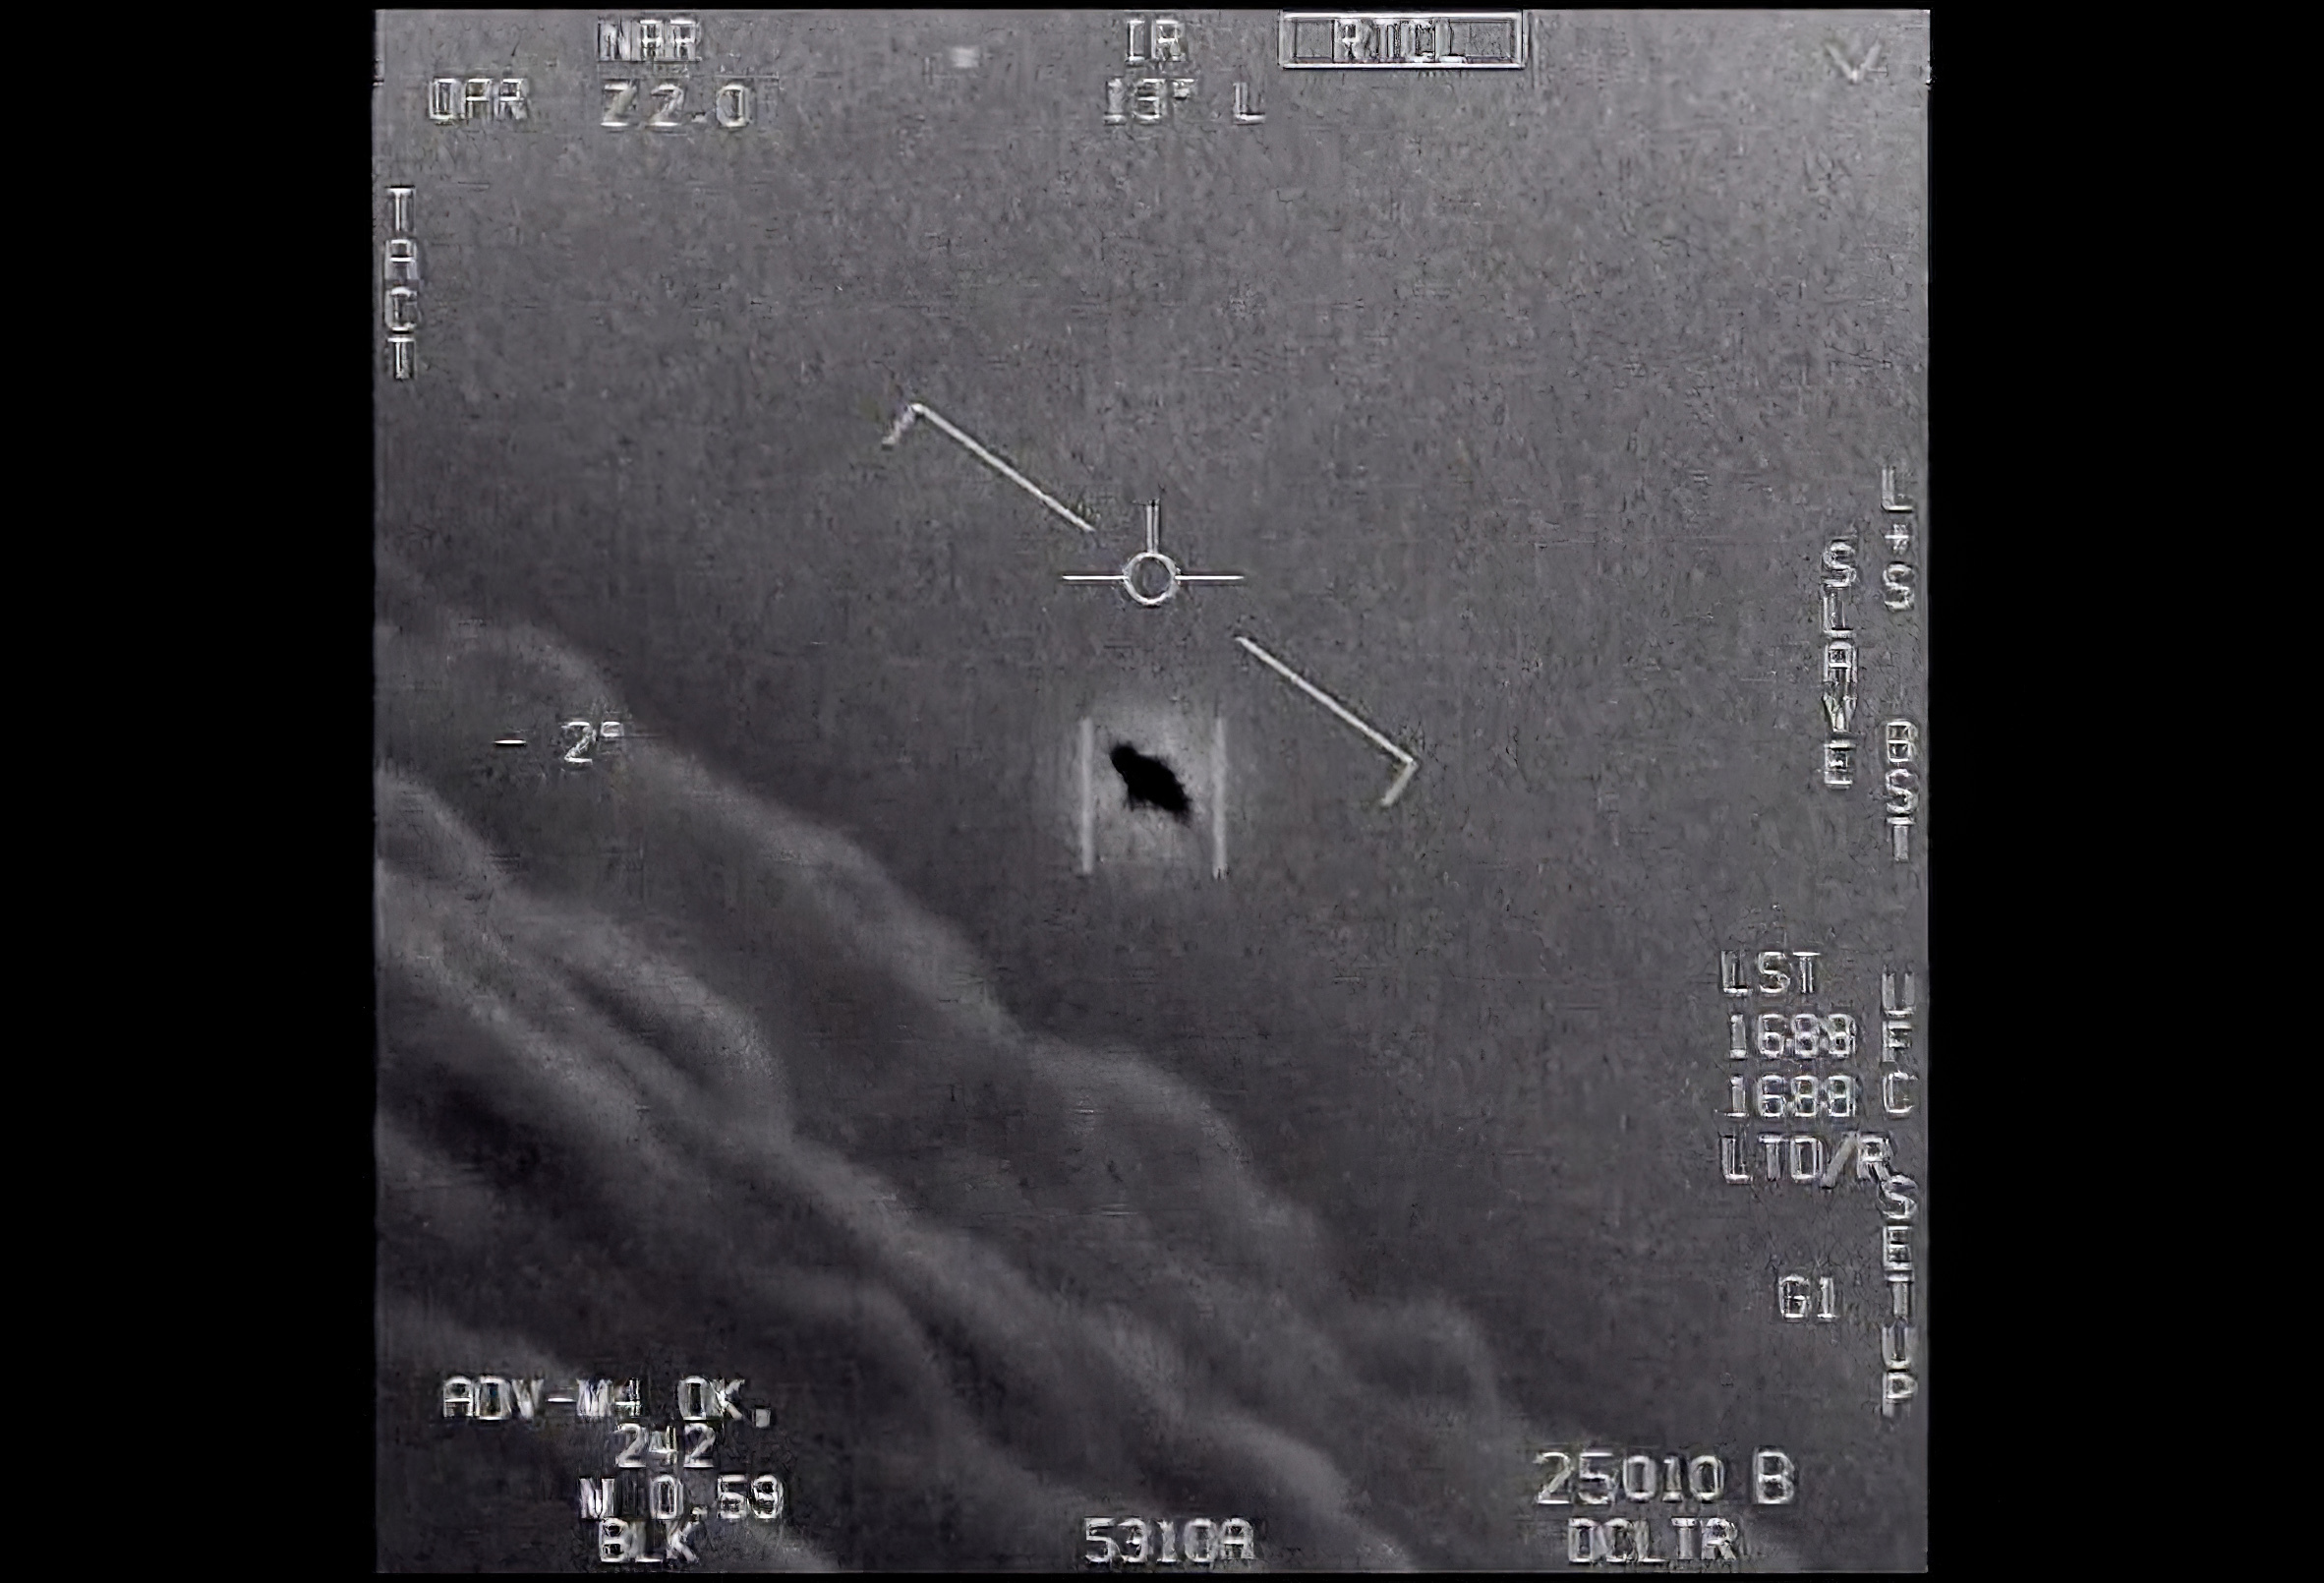 An image from a Navy jet of an unexplained flying object